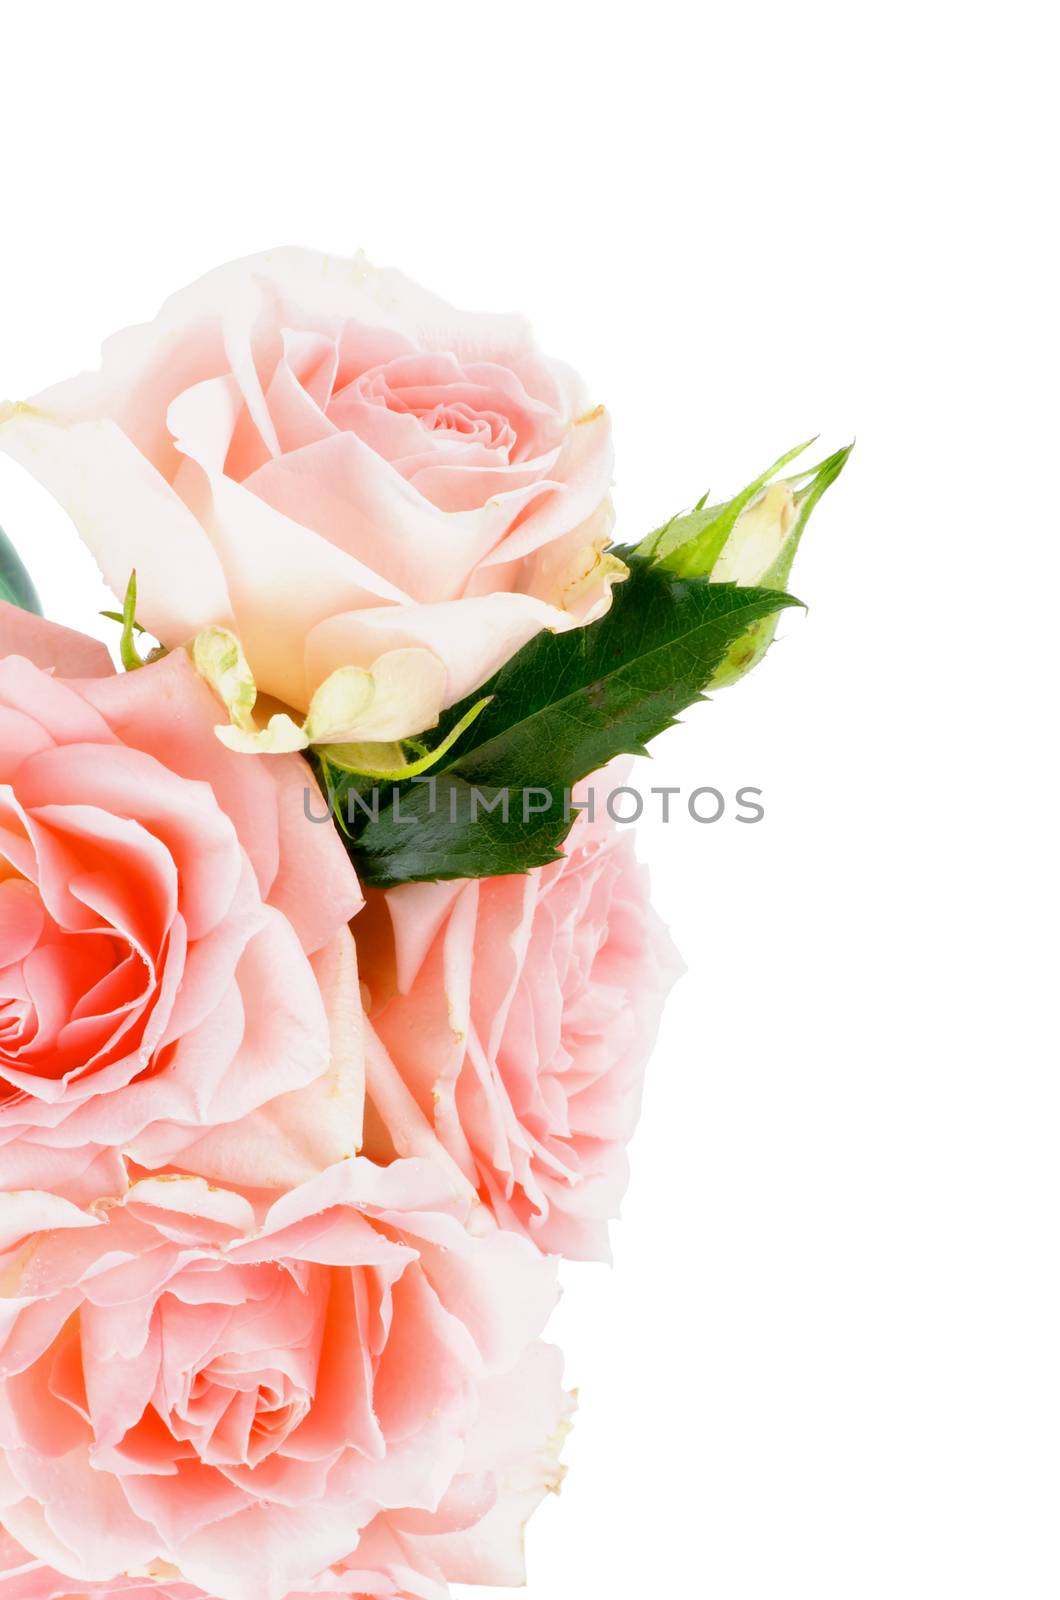 Beauty Cream Pink Roses with Leafs and Bud isolated on white background. Vertical View